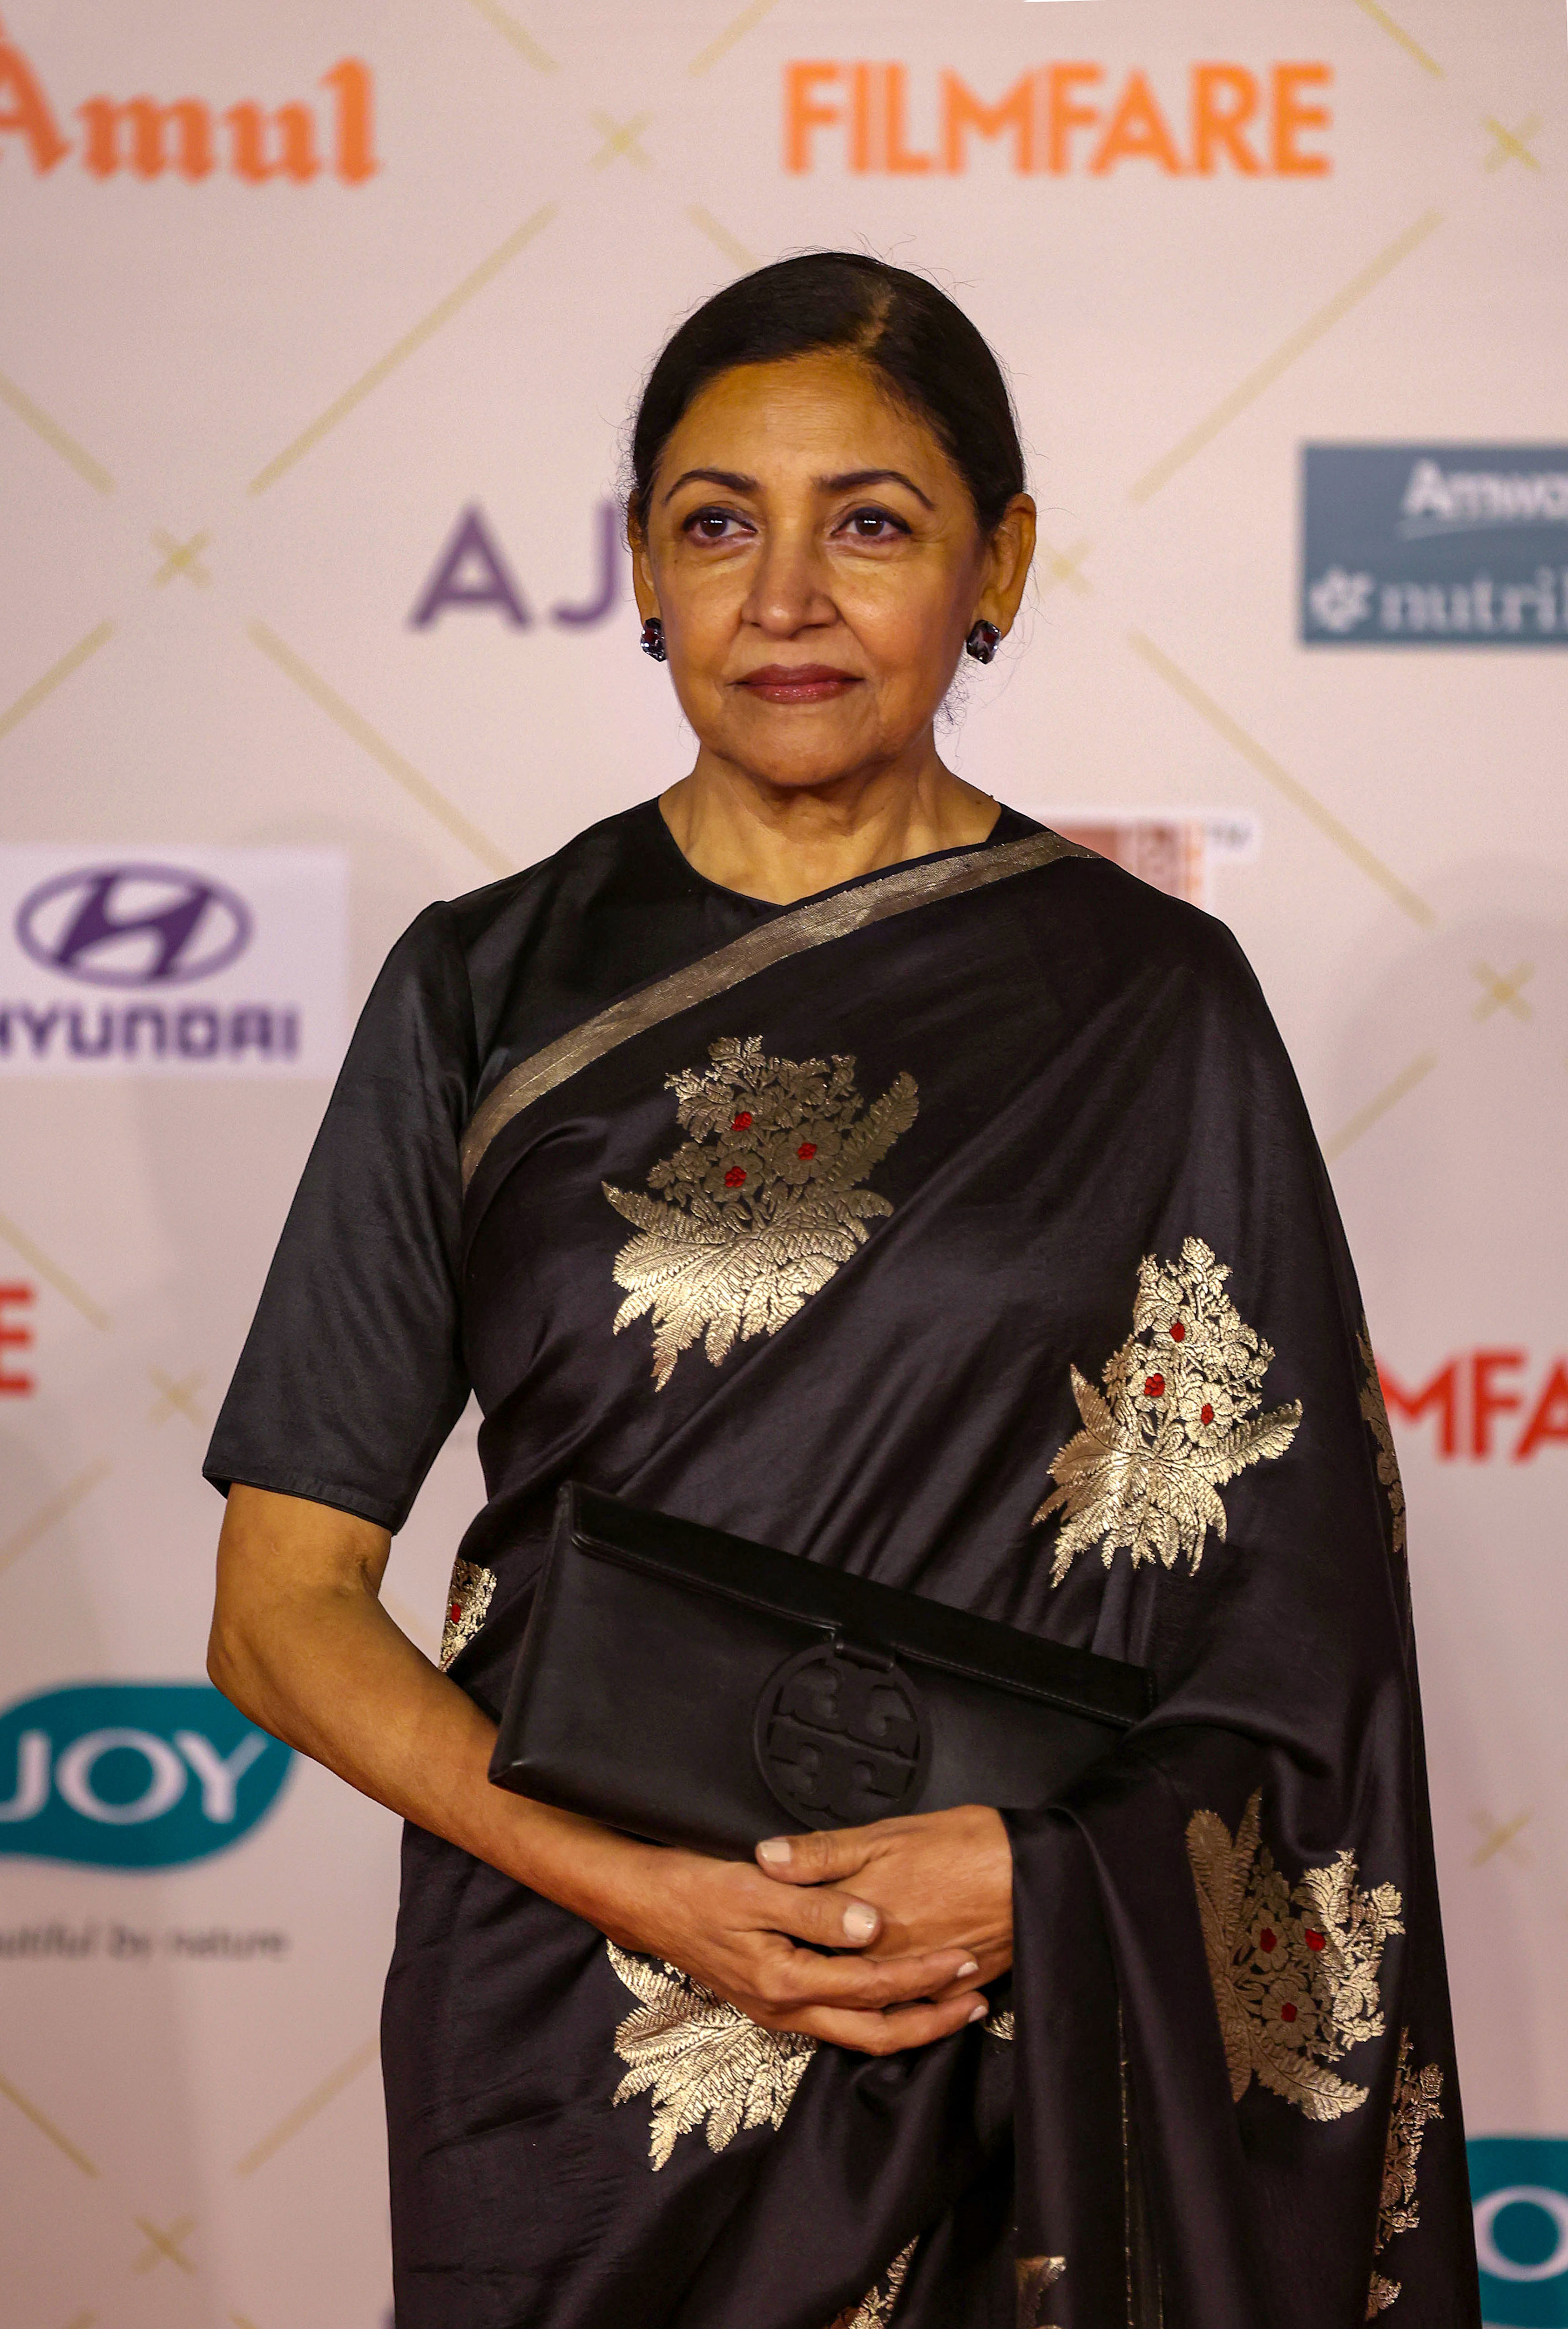 bollywood celebrities walk the red carpet as guj hosts filmfare awards for first time